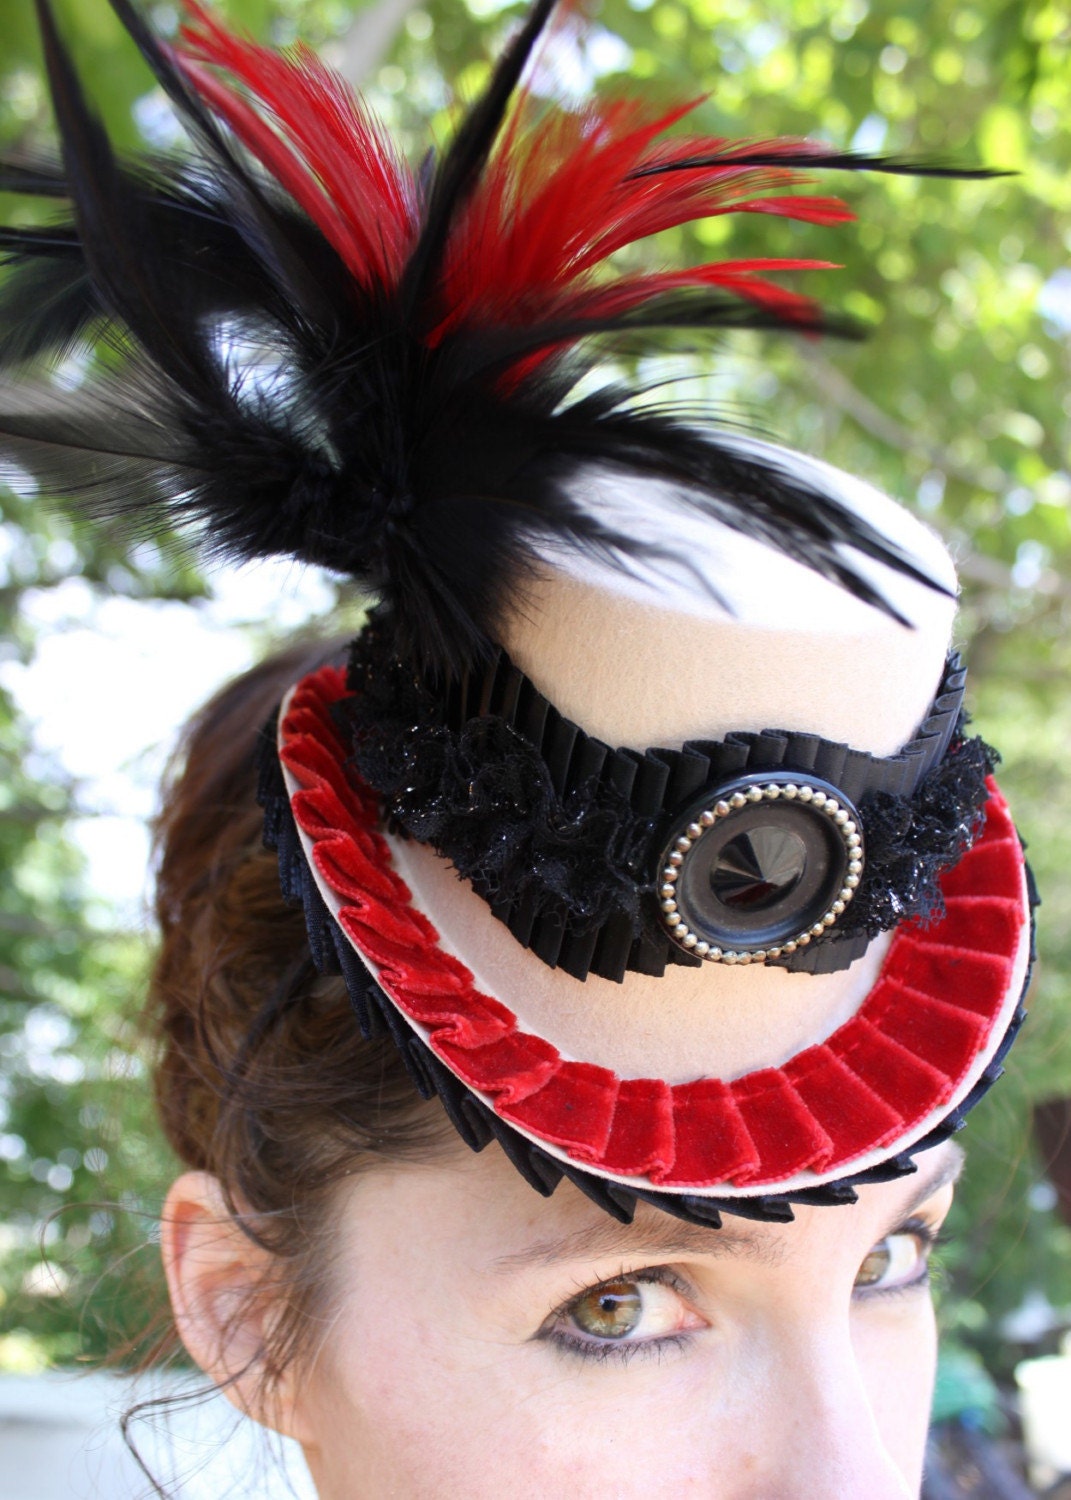 TODDIE TOPPER - Cream Mini Top Hat w/ Red Velvet Trim and Box Pleated Sparkle Trim, Red and Black Feathers Topped with Vintage Button